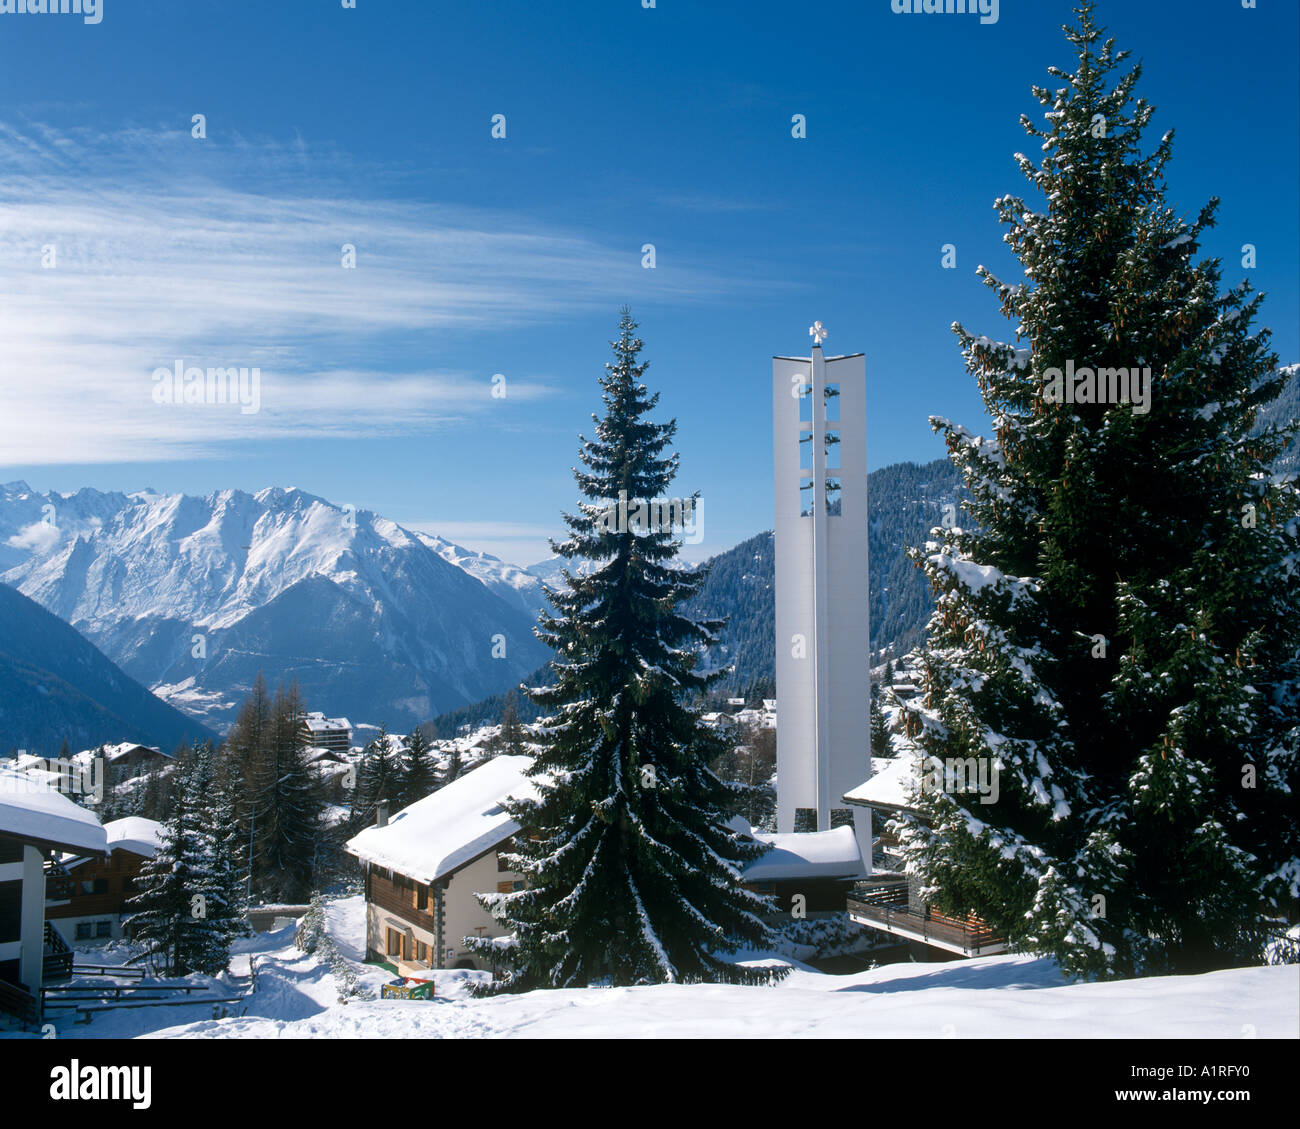 View over the resort of Verbier with church steeple in the foreground, Bernese Alps, Switzerland Stock Photo